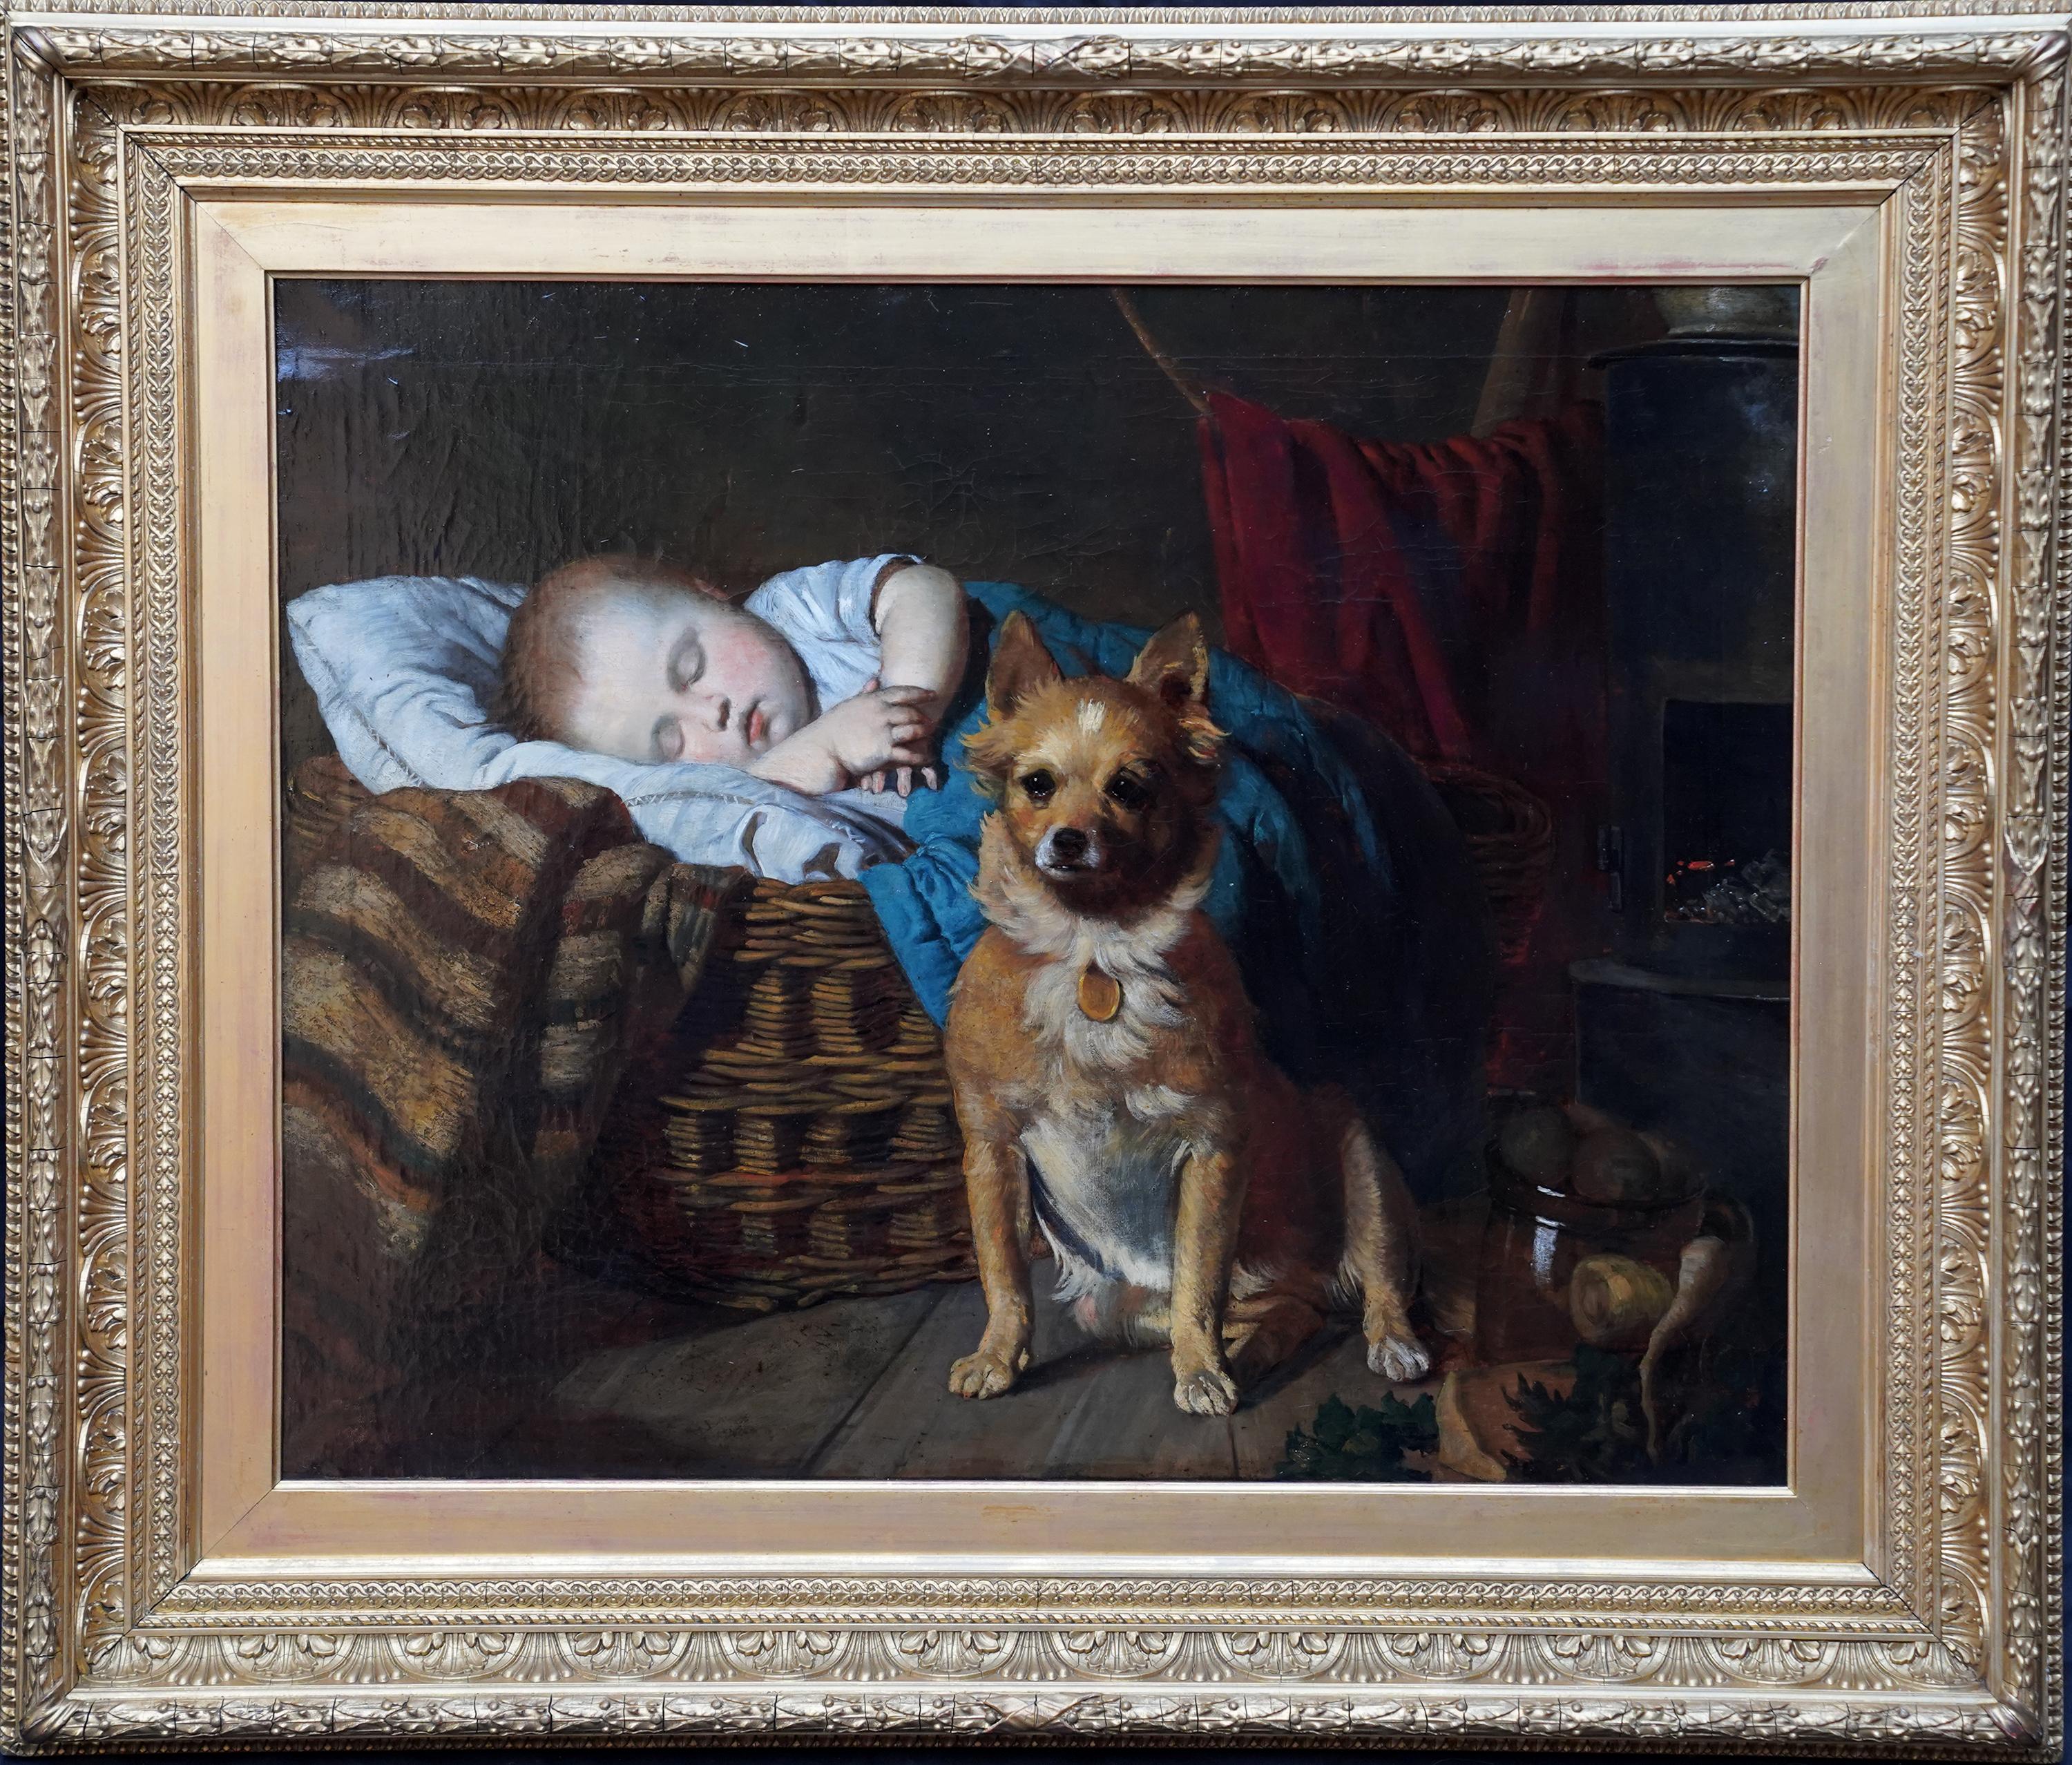 Henry Turner Munns Portrait Painting - Portrait of a Baby and Dog - British Victorian Genre animal art oil painting 